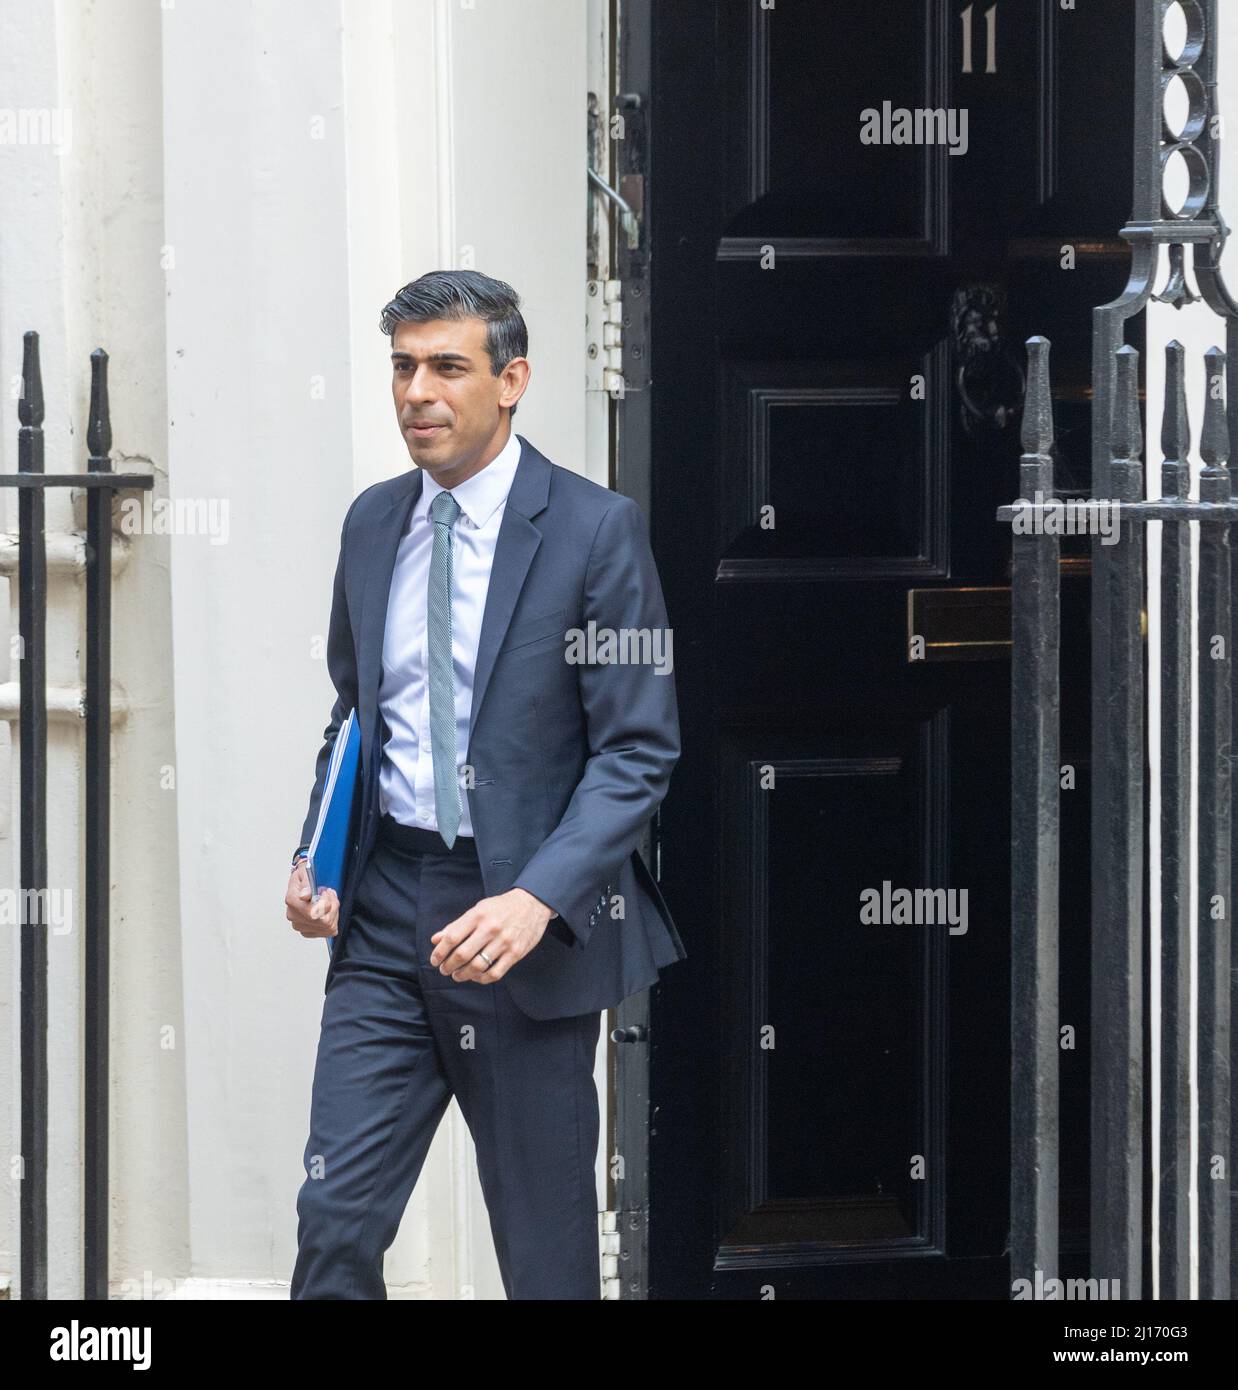 London, UK. 23rd Mar, 2022. 23rd Mar 2022 Rishi Sunak, Chancellor of the Exchequer, leaves 11 Downing Street for the Autumn Statement Credit: Ian Davidson/Alamy Live News Stock Photo